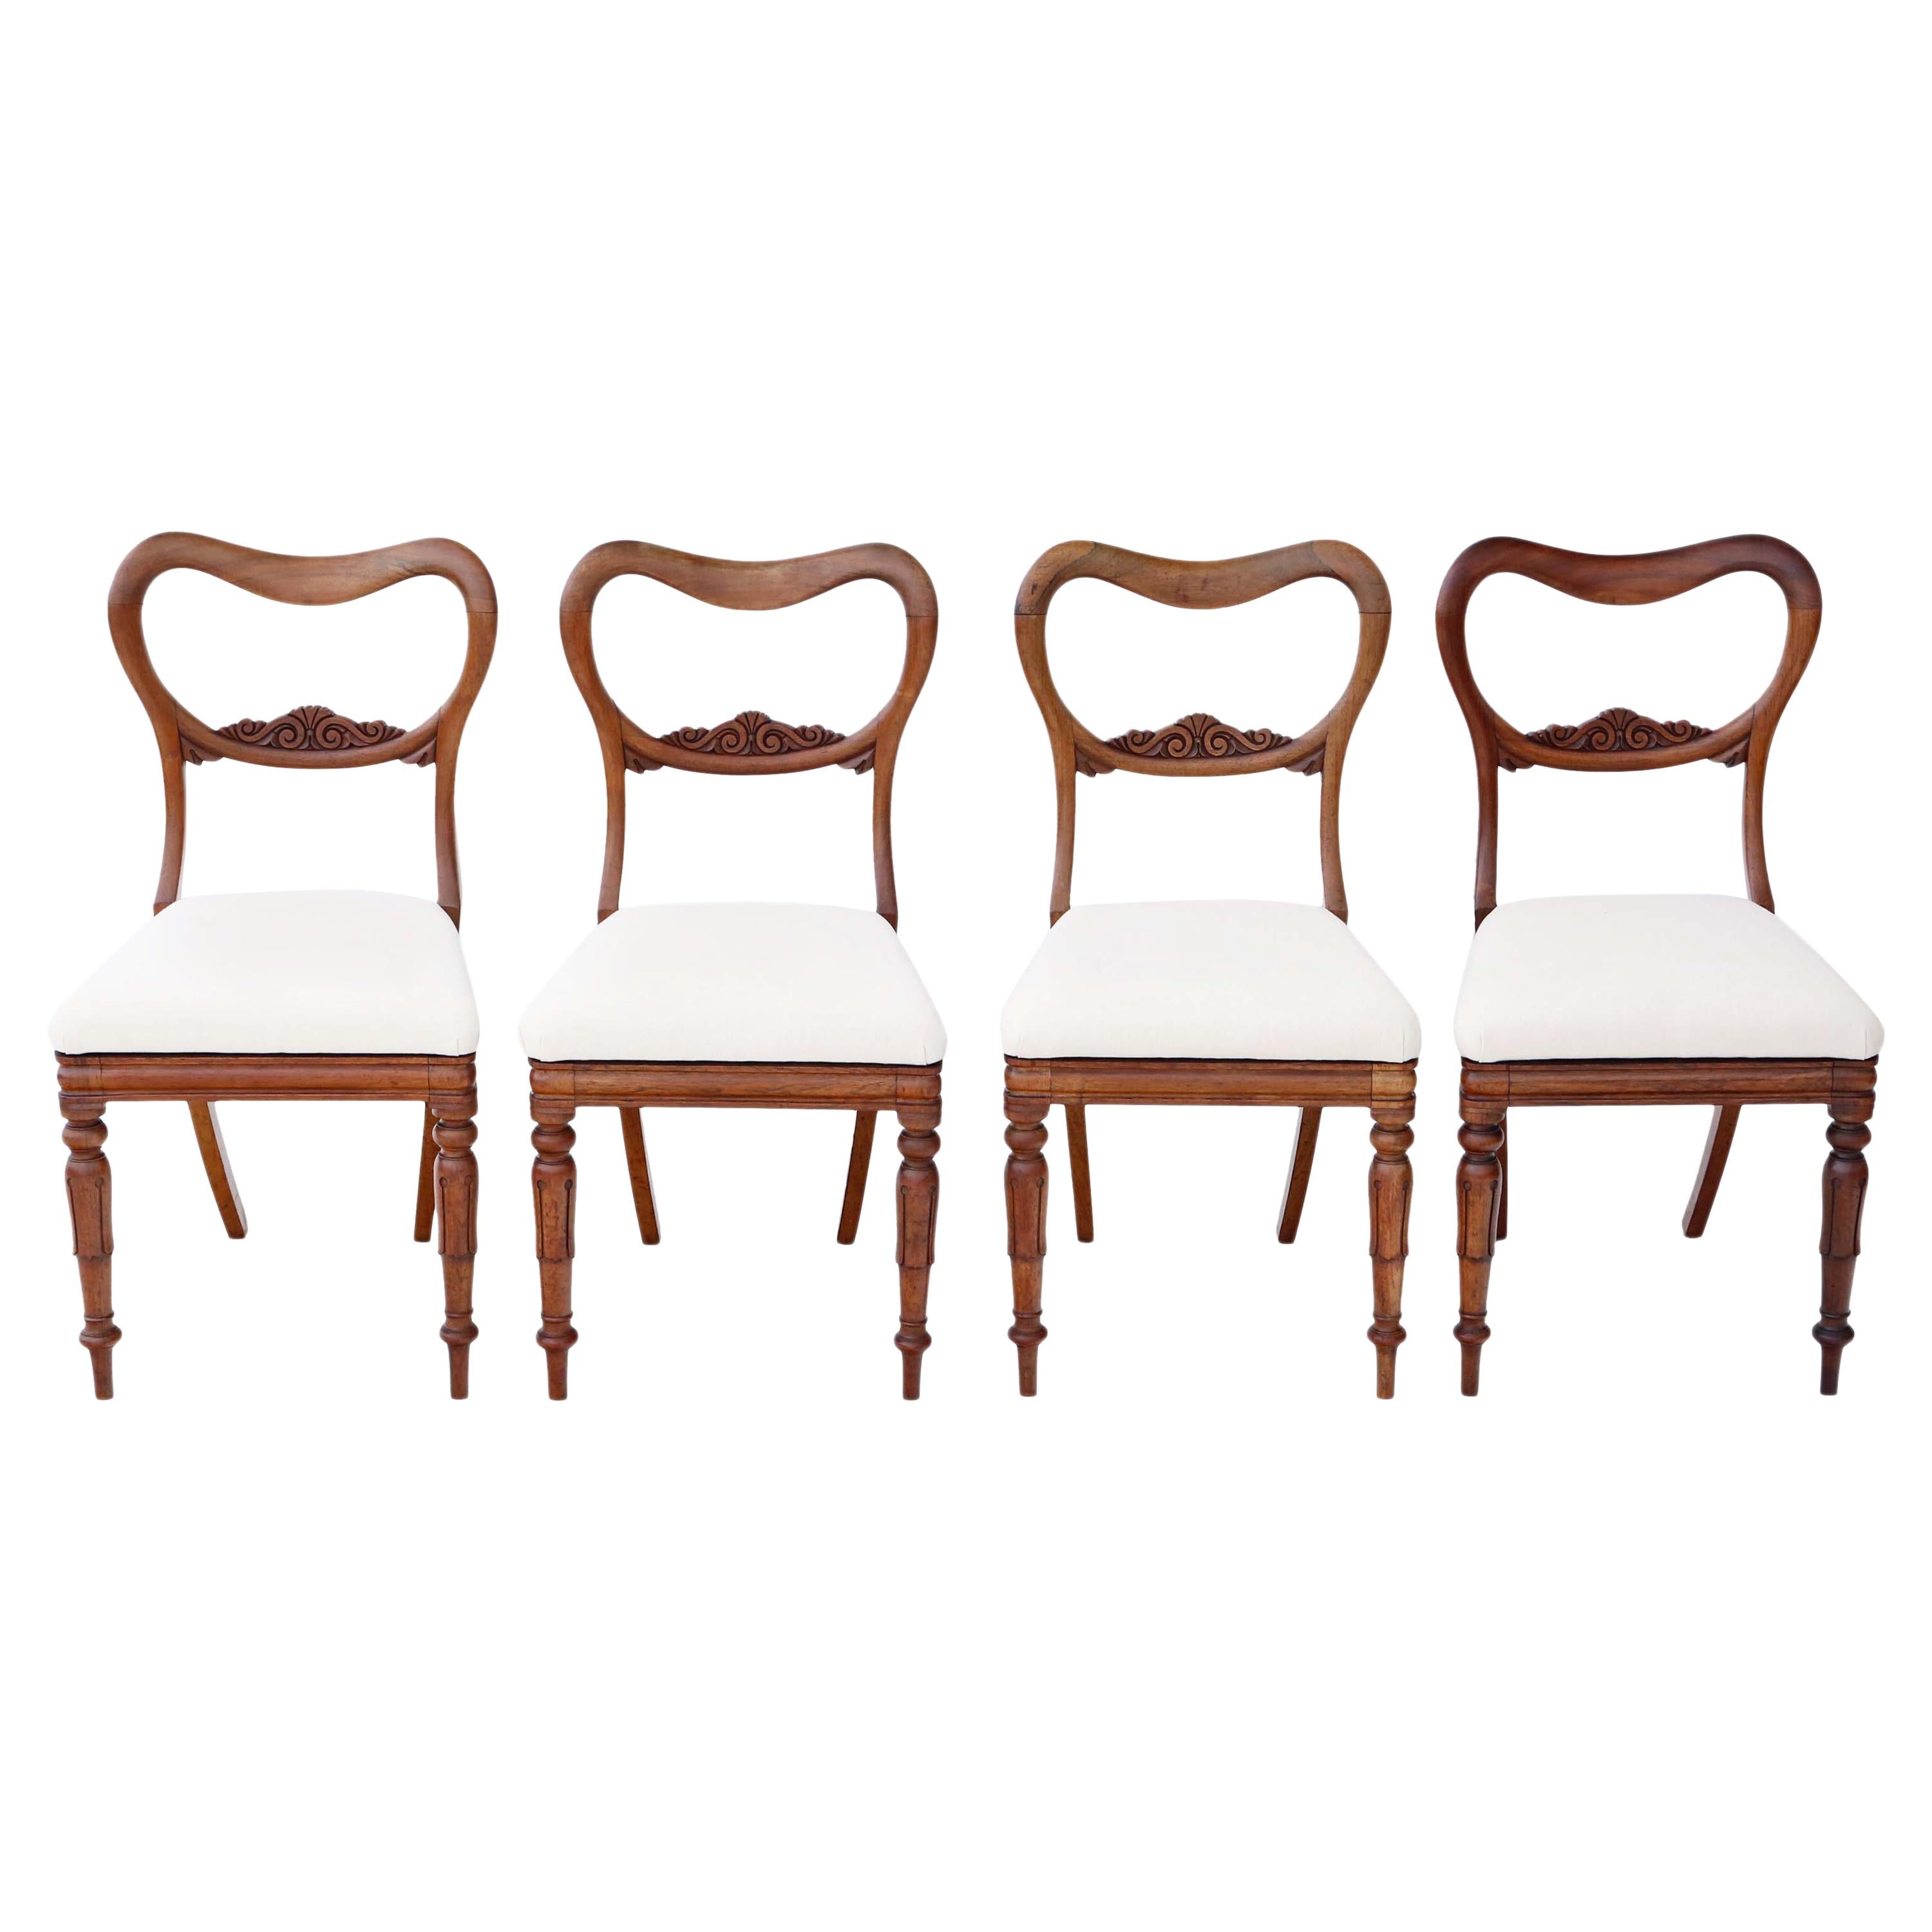 Set of 4 William IV Rosewood Balloon Back Dining Chairs